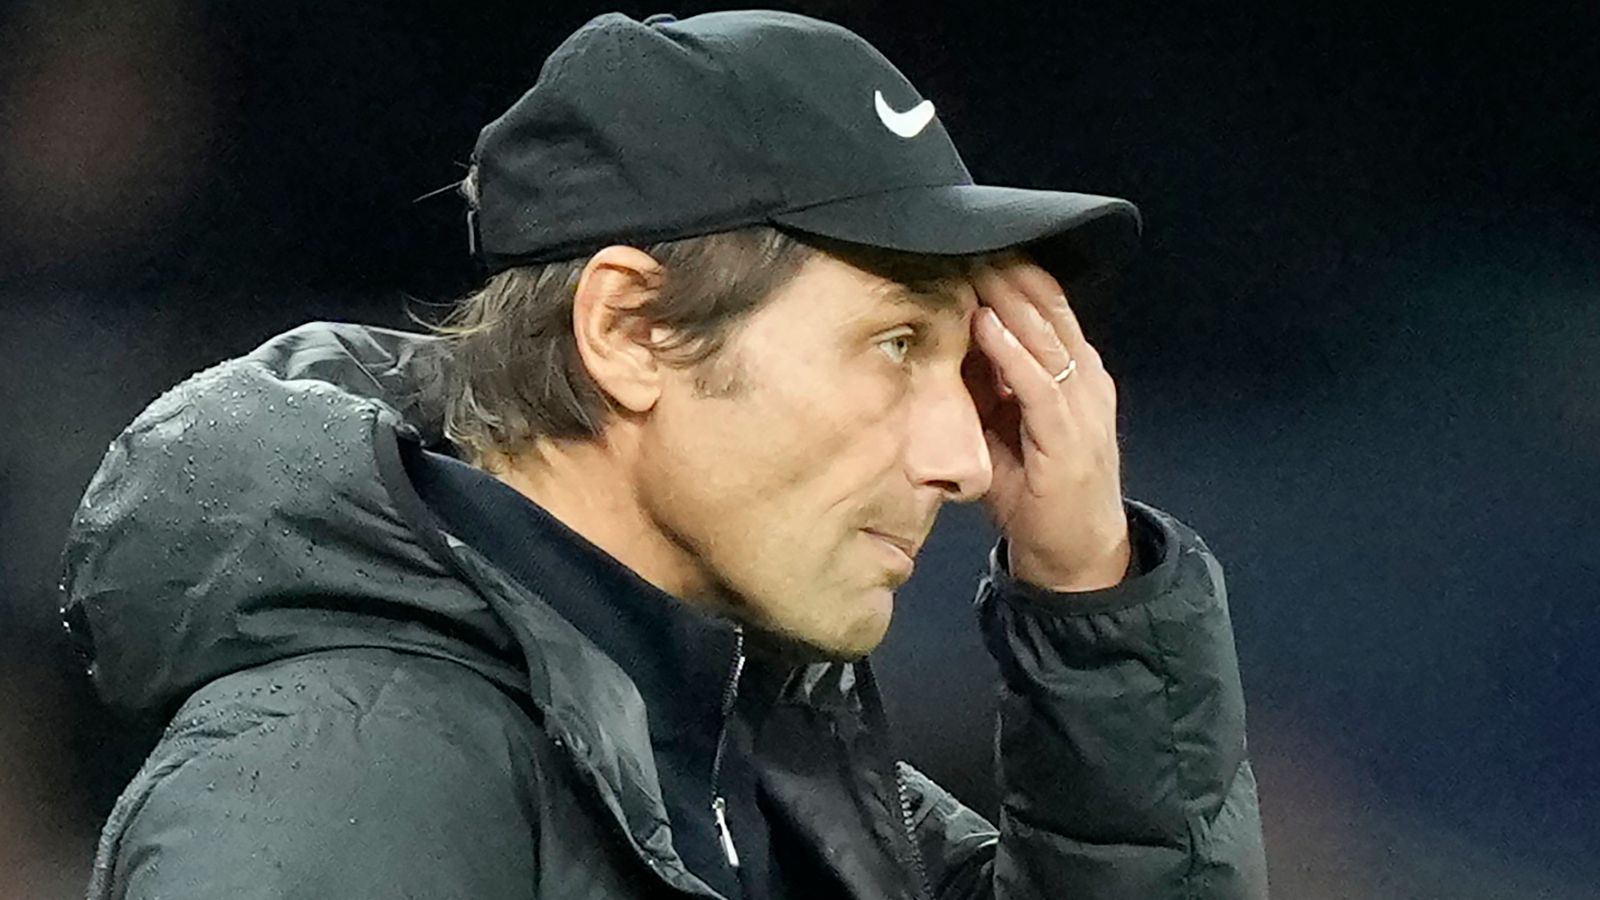 Antonio Conte admits Tottenham ‘cannot work miracles’ after Newcastle defeat as Jamie Redknapp questions delayed contract talks